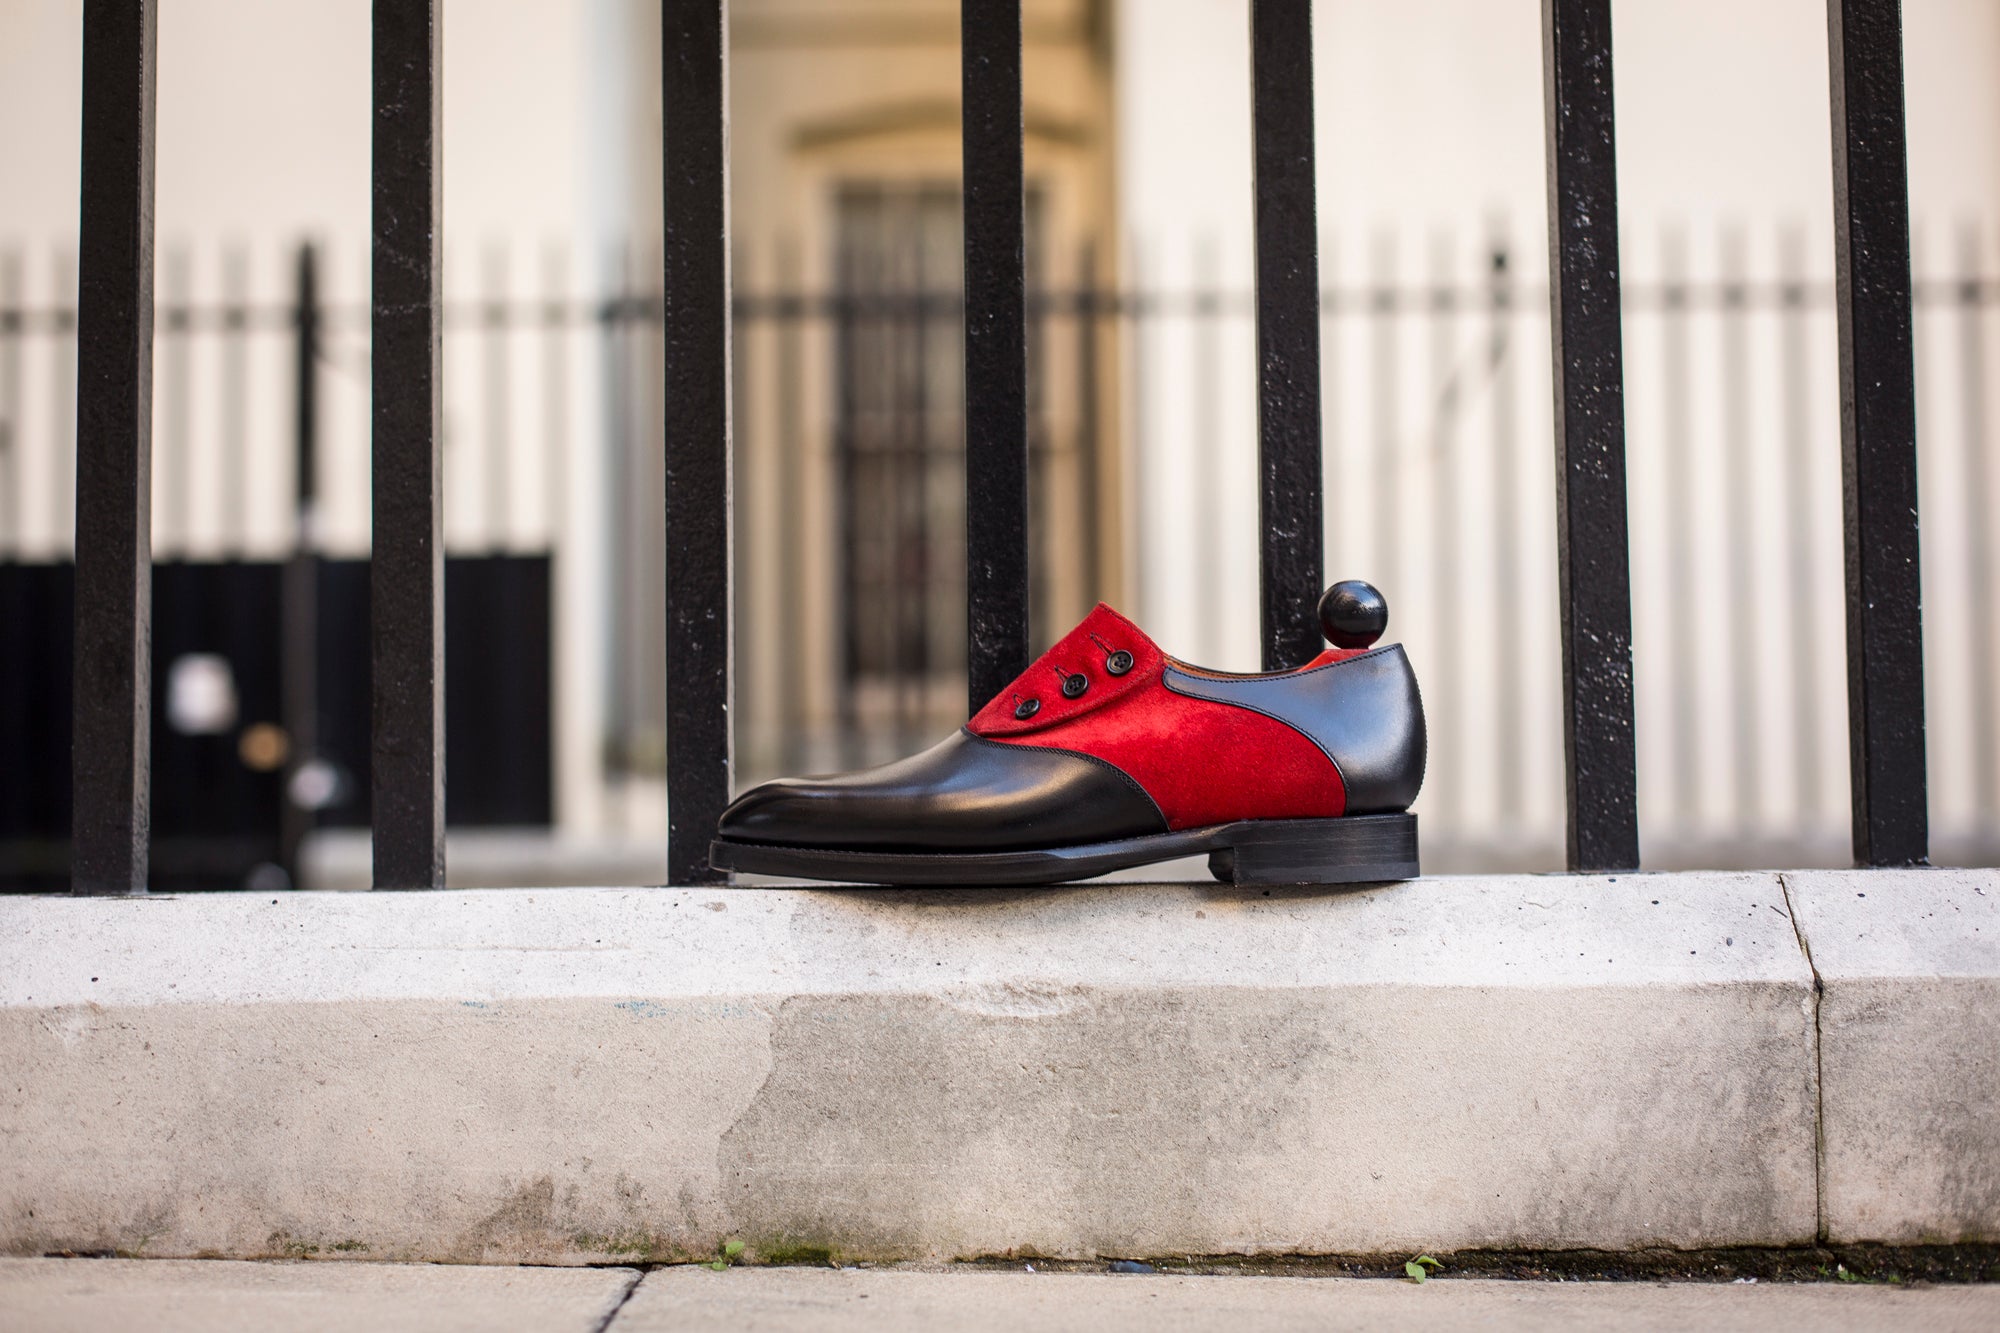 Aurora - MTO - Black Calf / Red Suede - NGT Last - Single Leather Sole